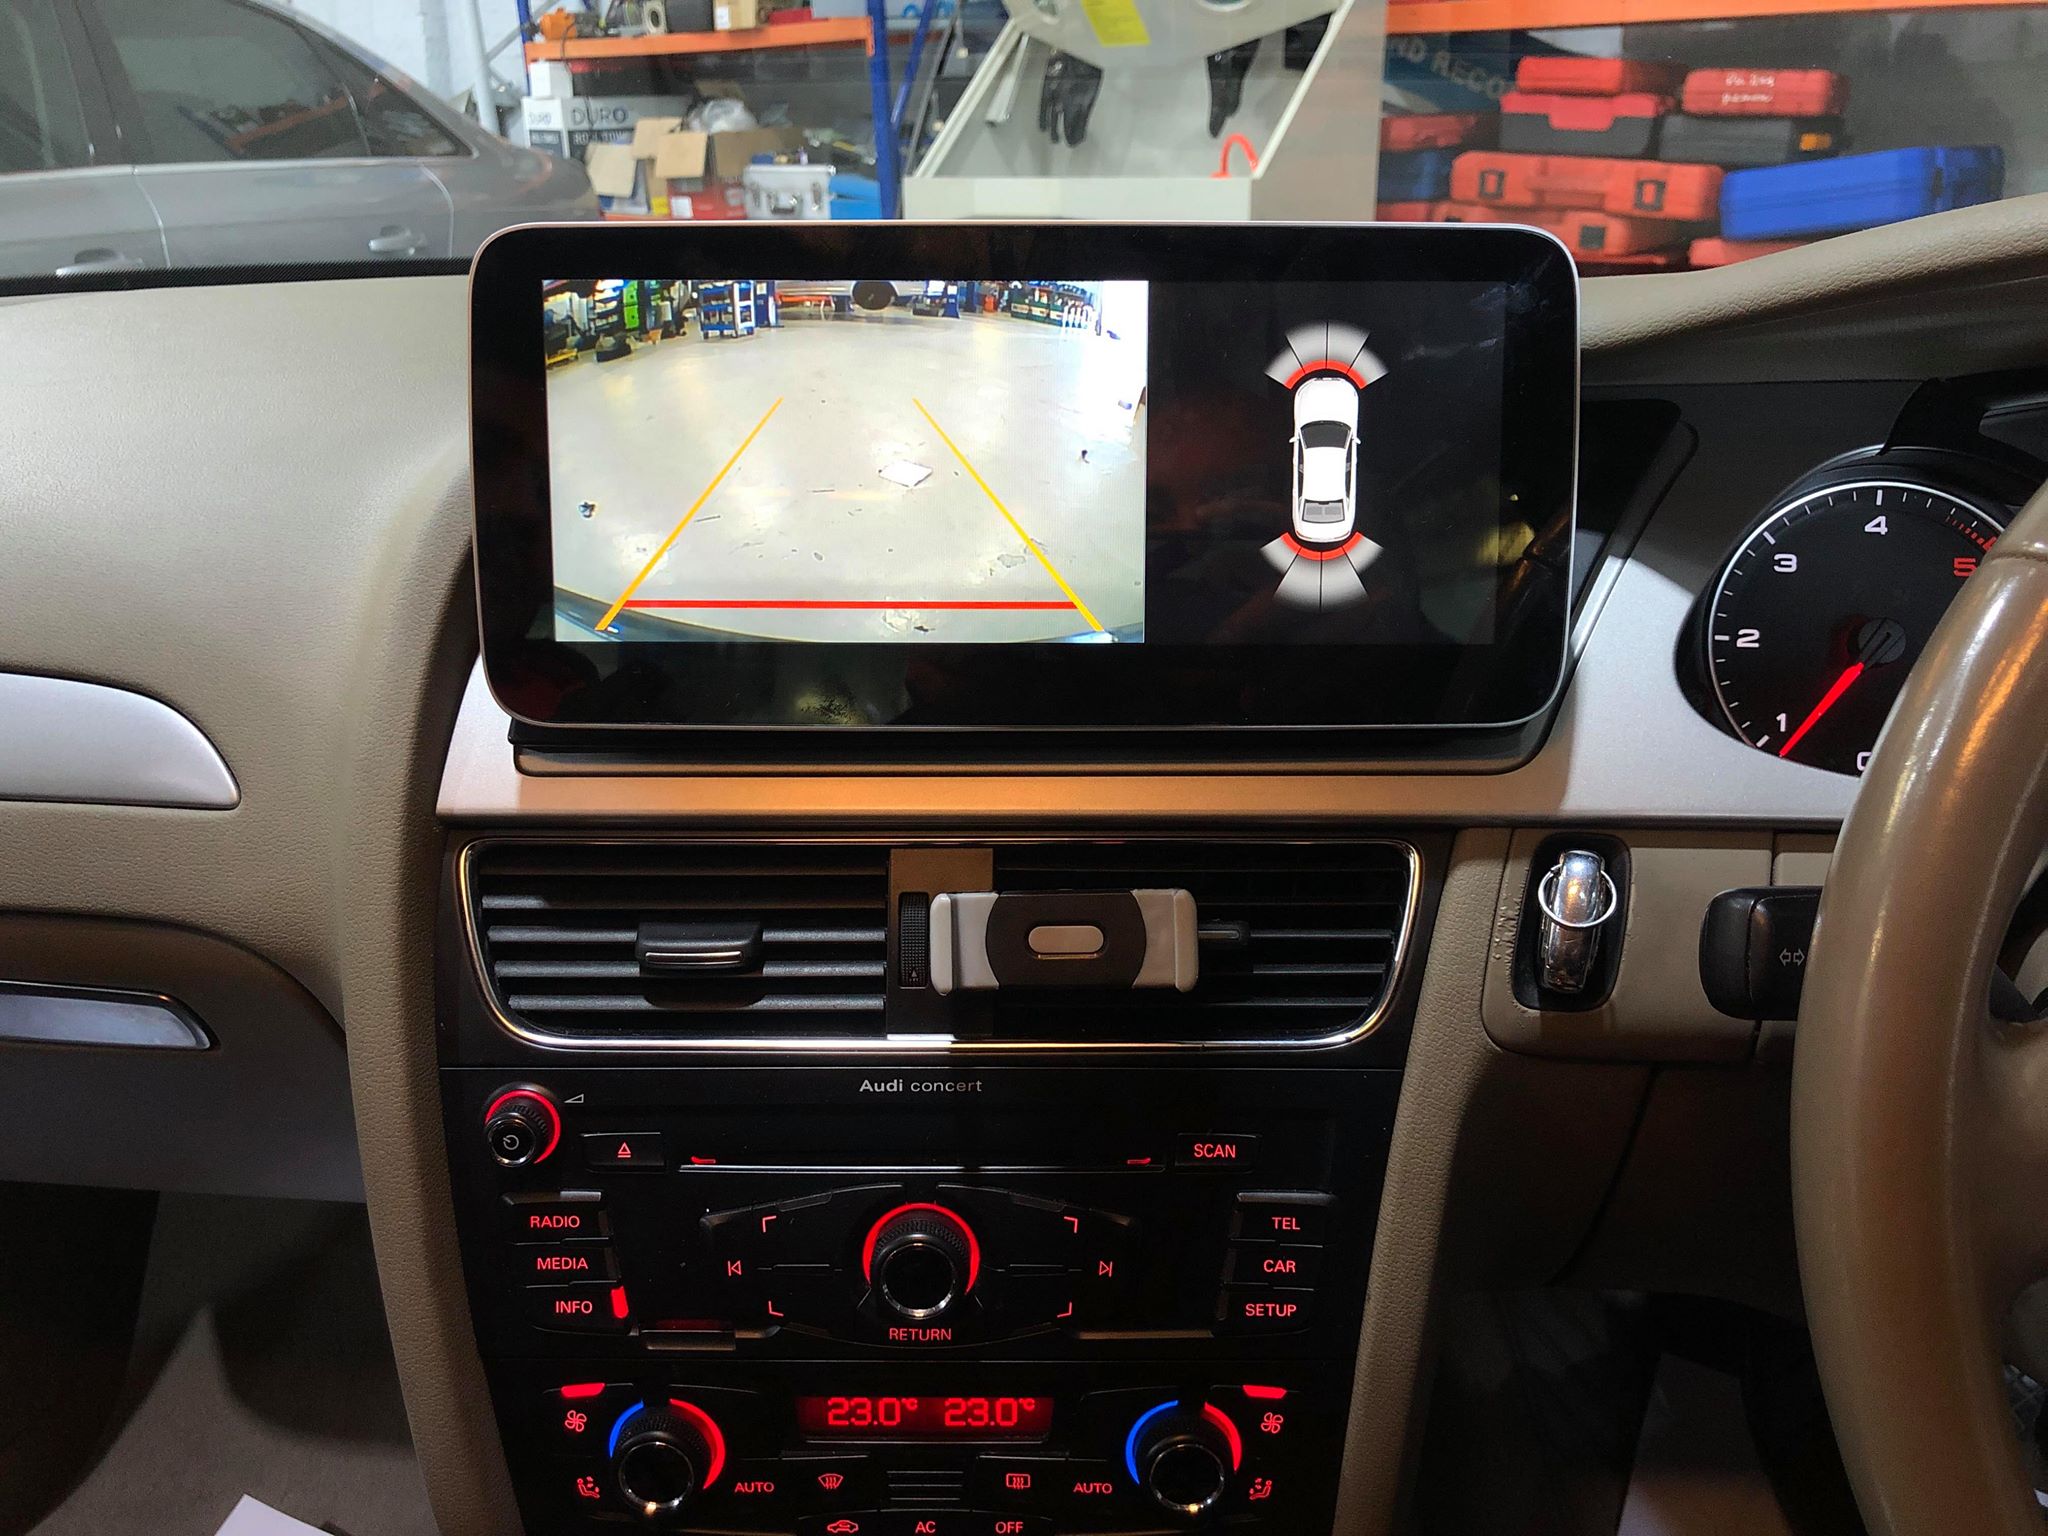 ANP® 10.25” Android 10 System Car GPS Navi For Audi A4 B8 A5 2008-2012